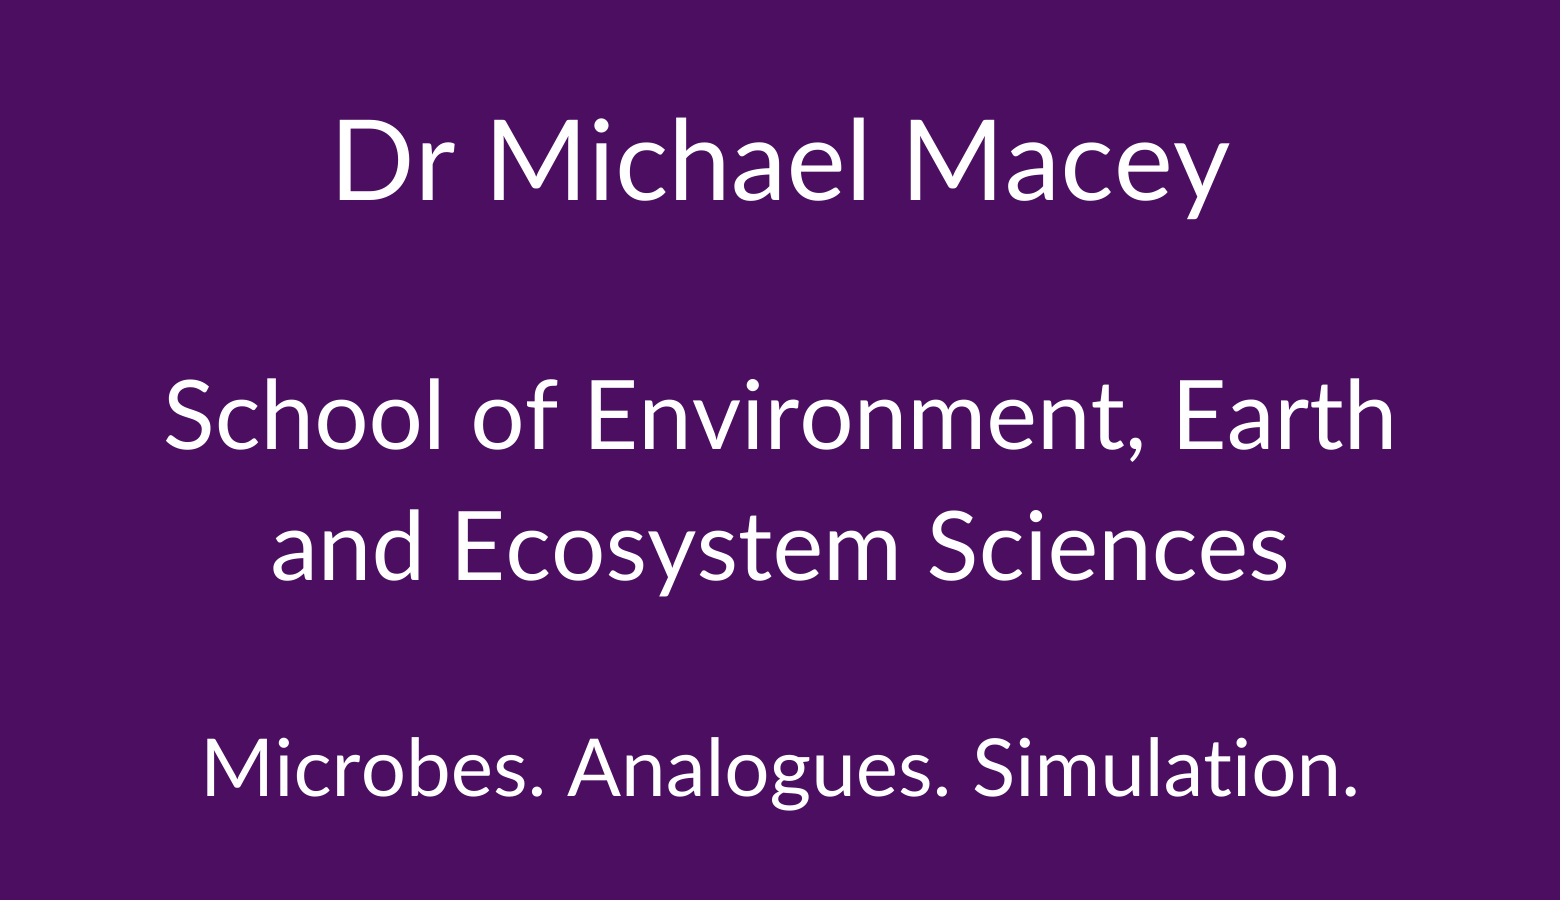 Dr Michael Macey. School of Environment, Earth and Ecosystem Sciences. Microbes. Analogues. Simulation.